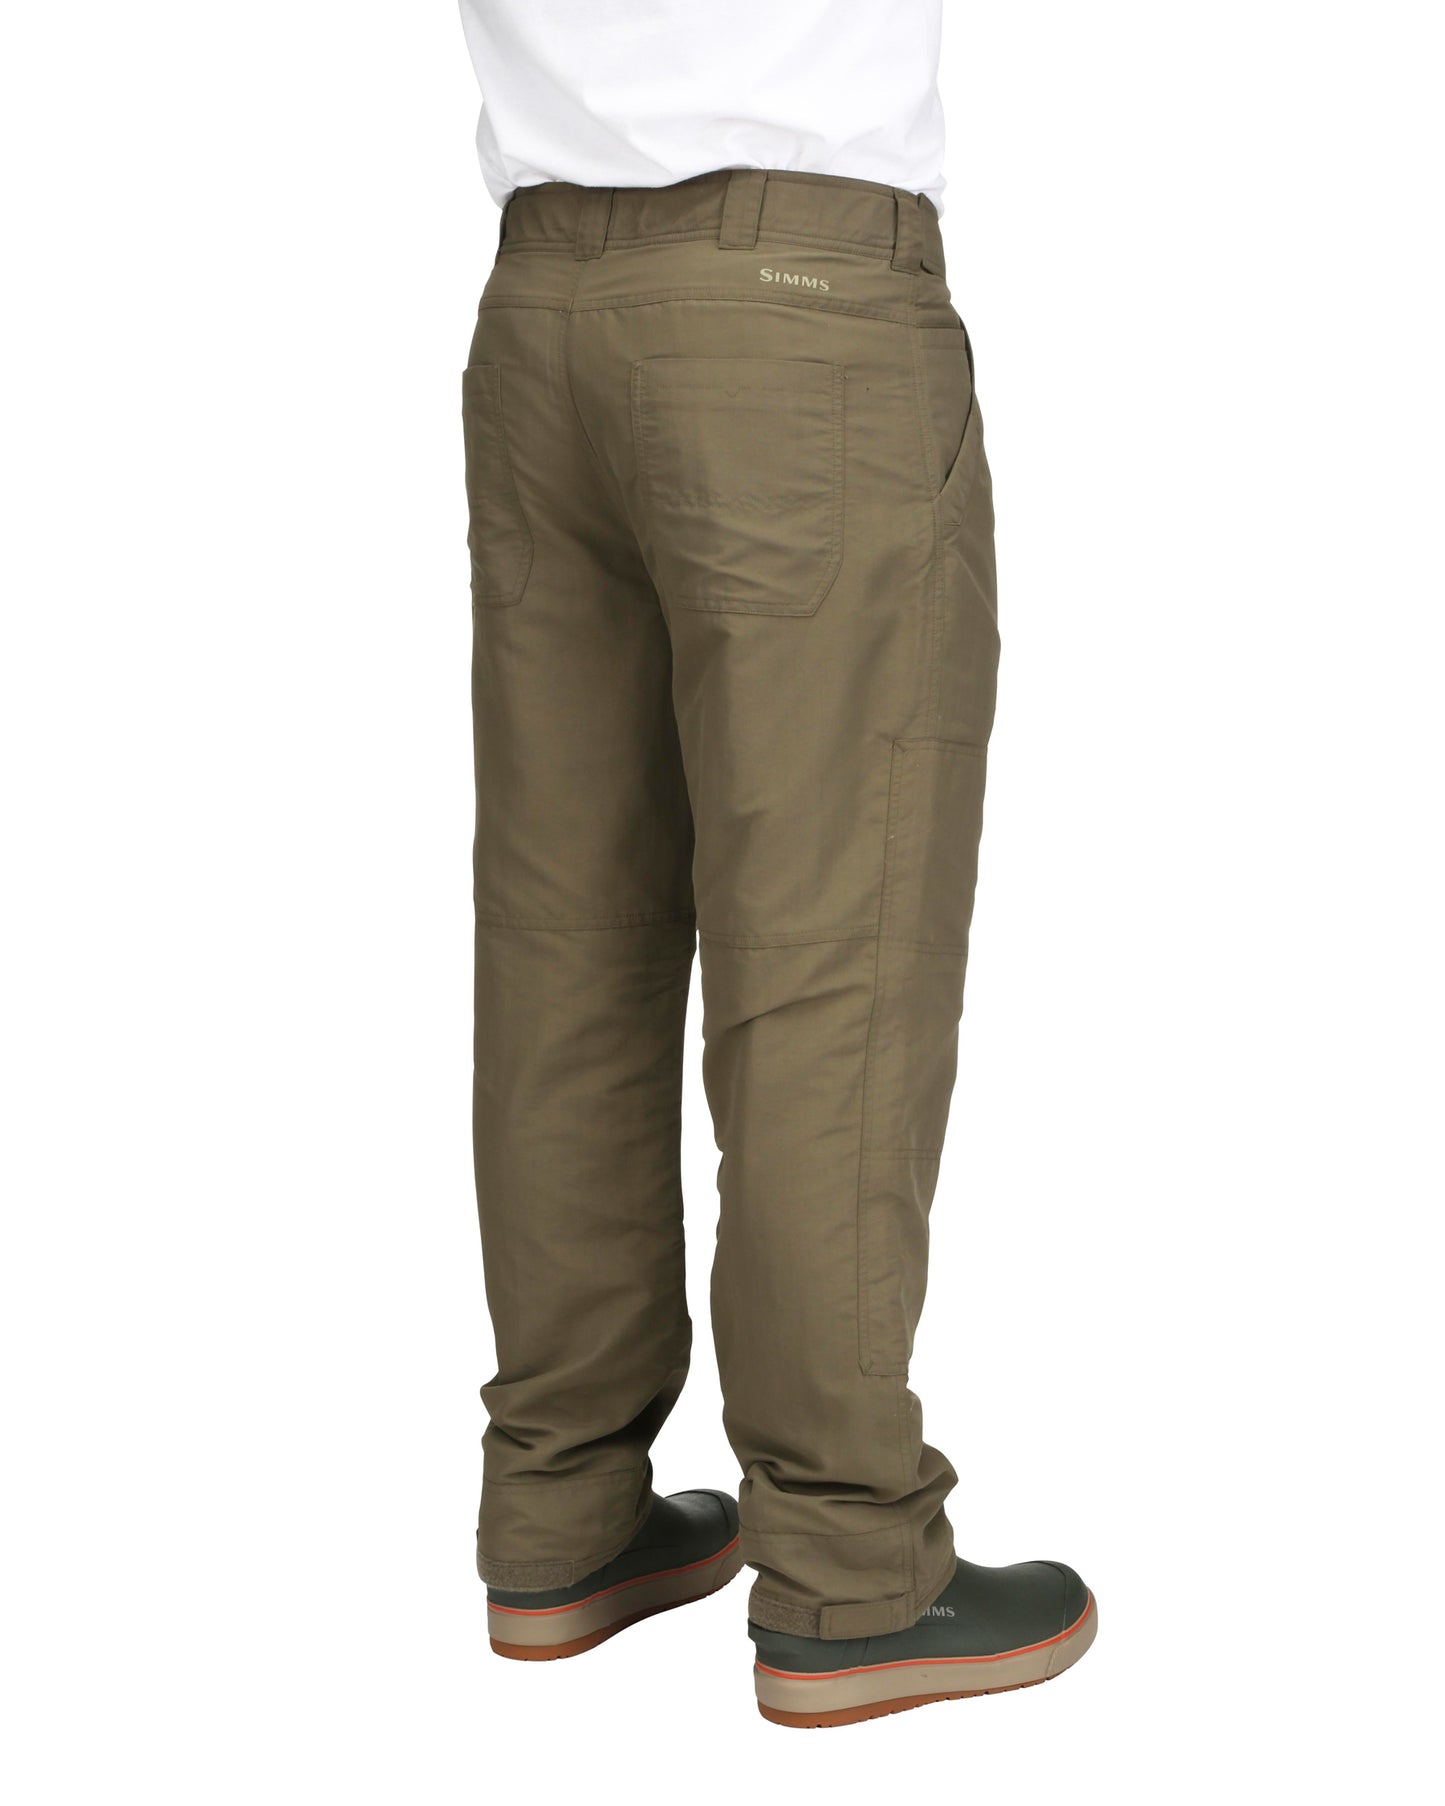 M's ColdWeather Pants  Simms Fishing Products